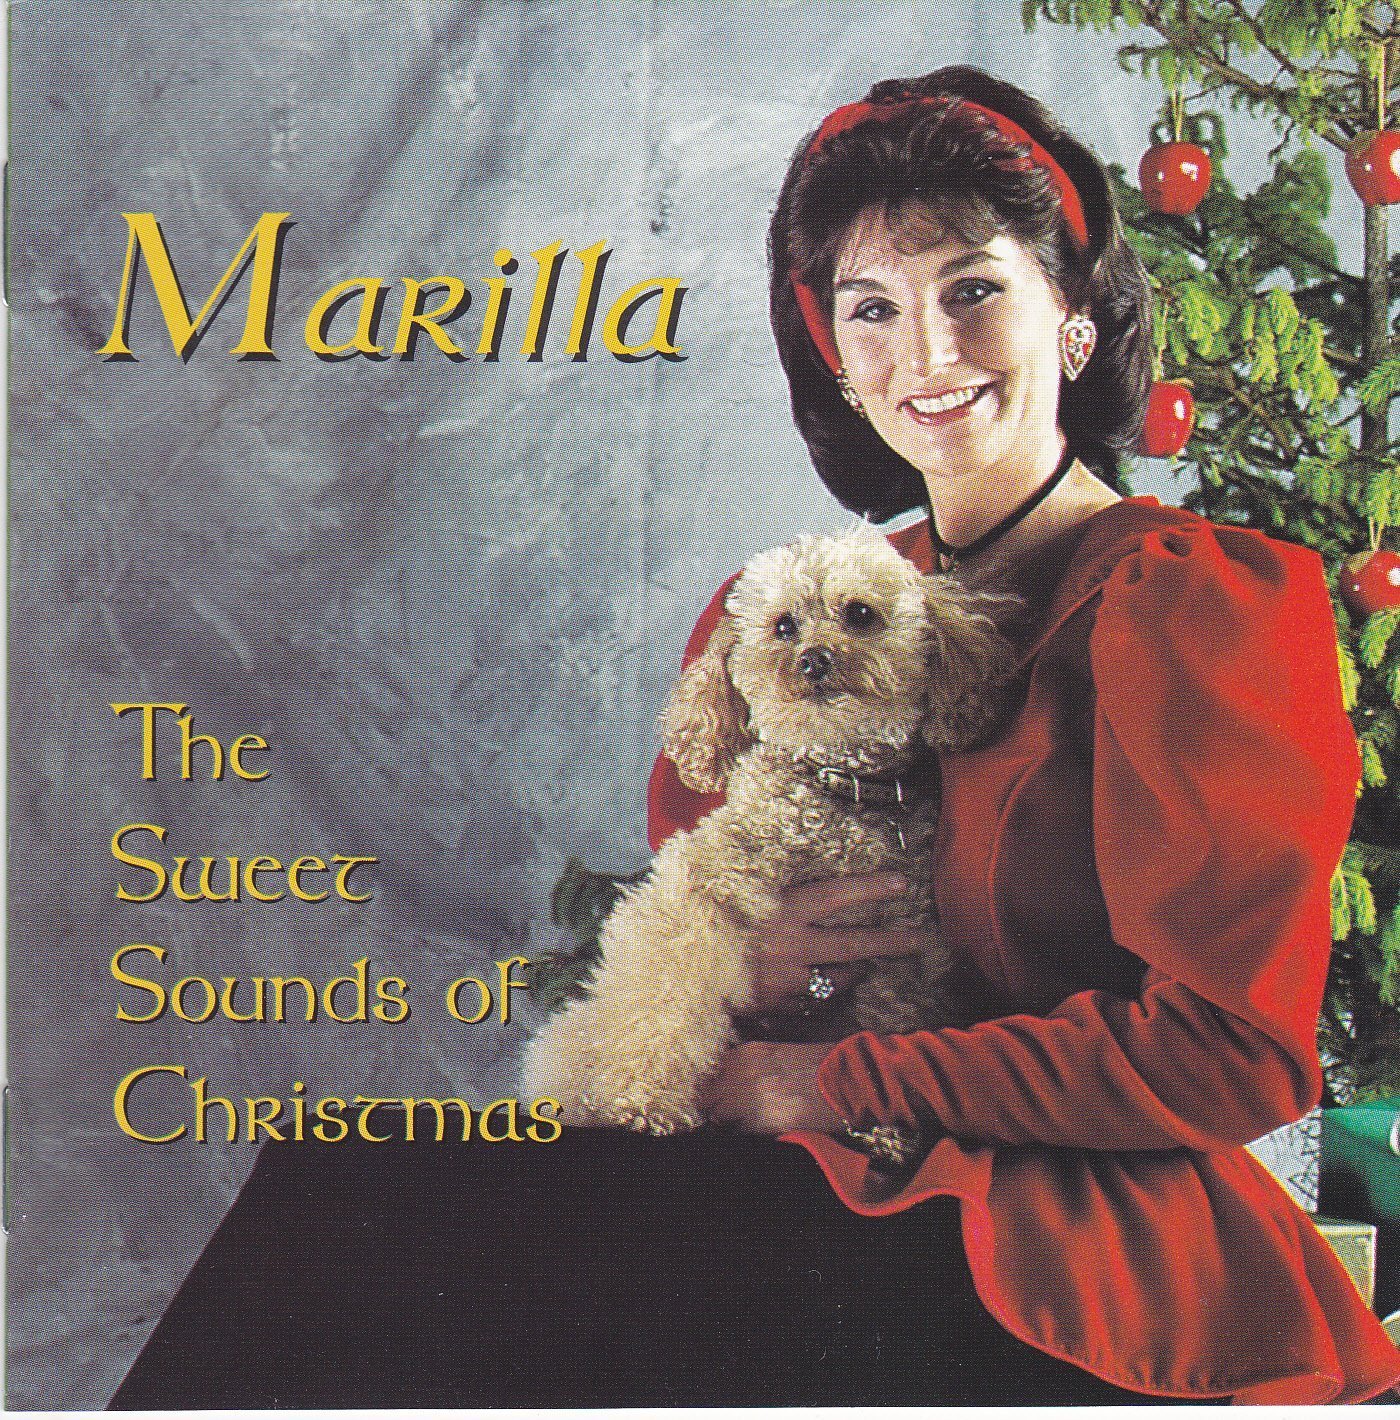 The sweet sounds of christmas by marilla ness